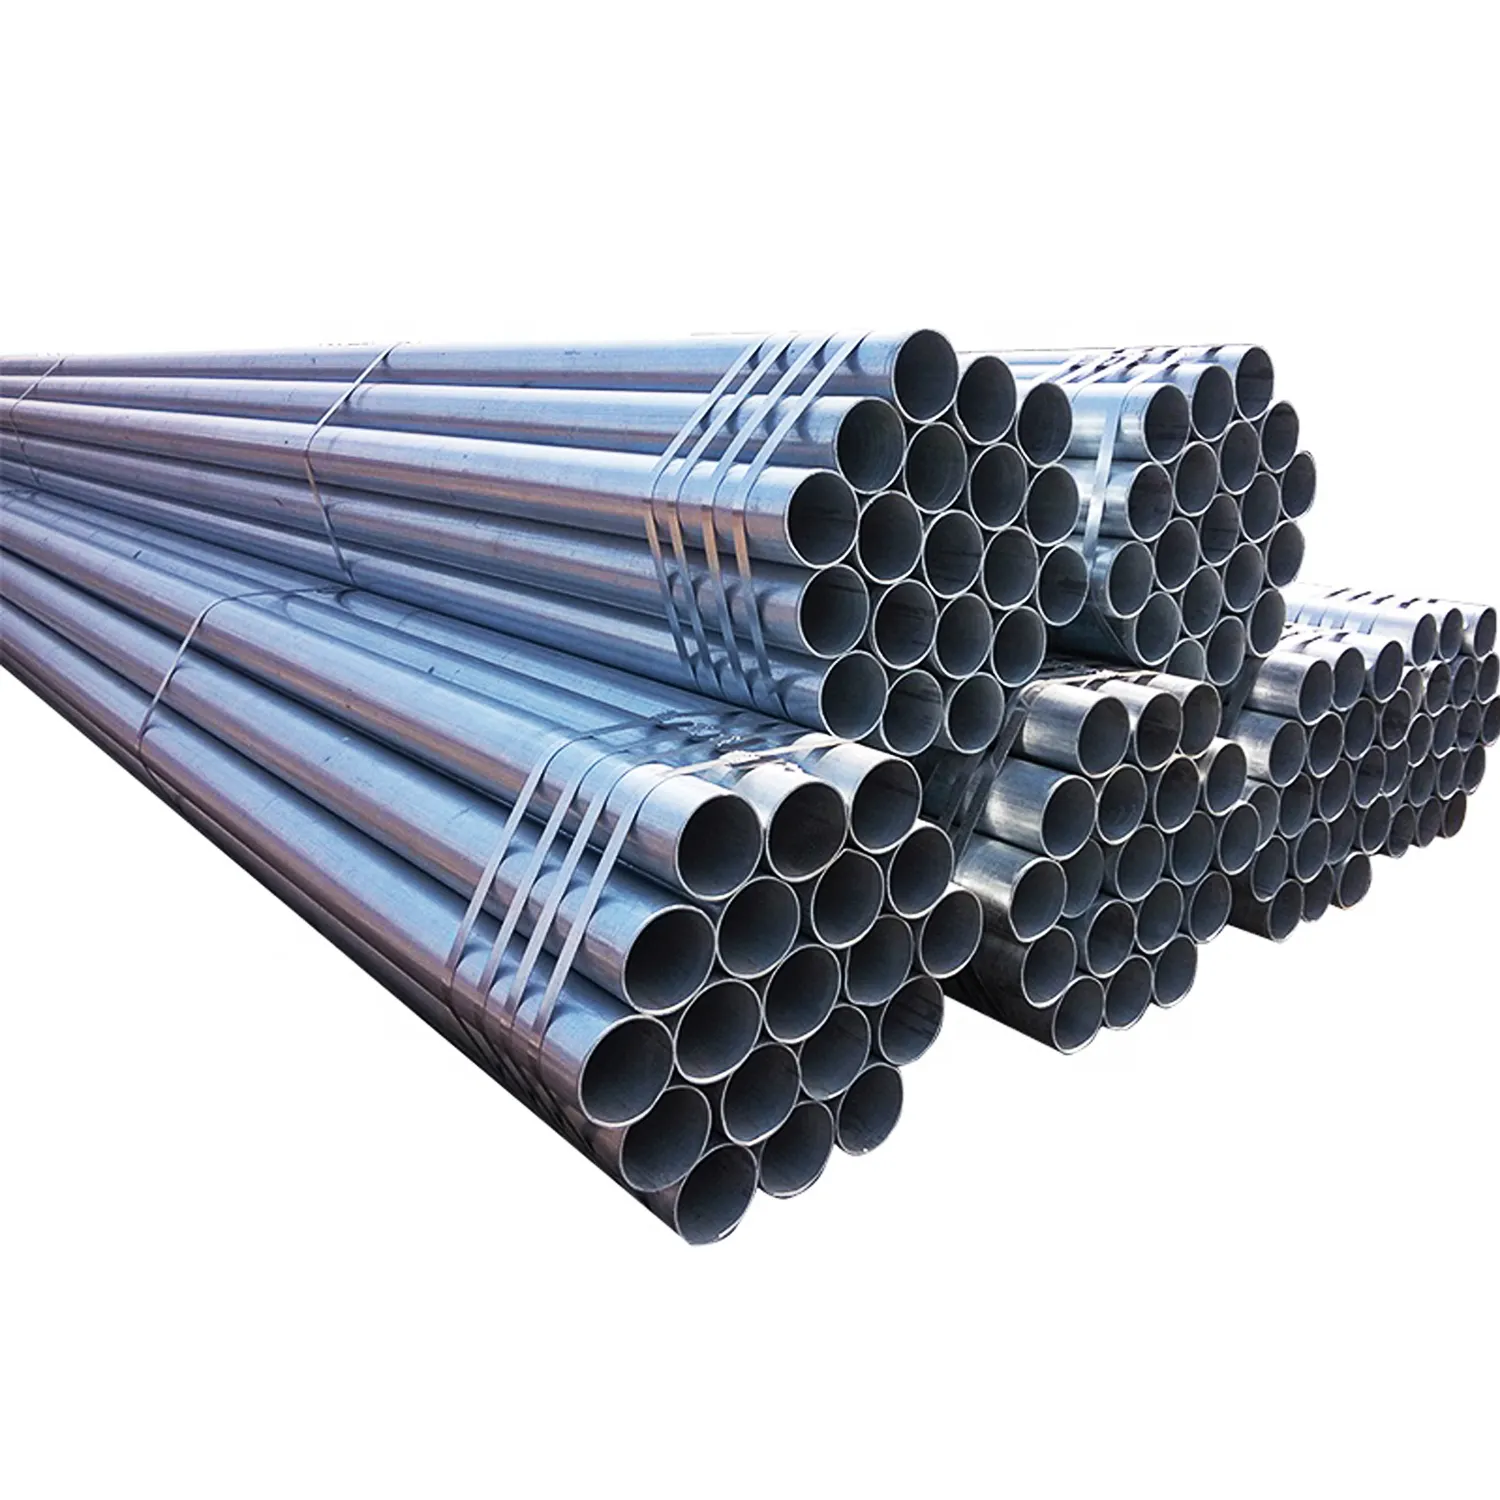 Hollow round ASTM DIN 18mm 45mm diameter A106 galvanized pipe scaffolding steel tube price